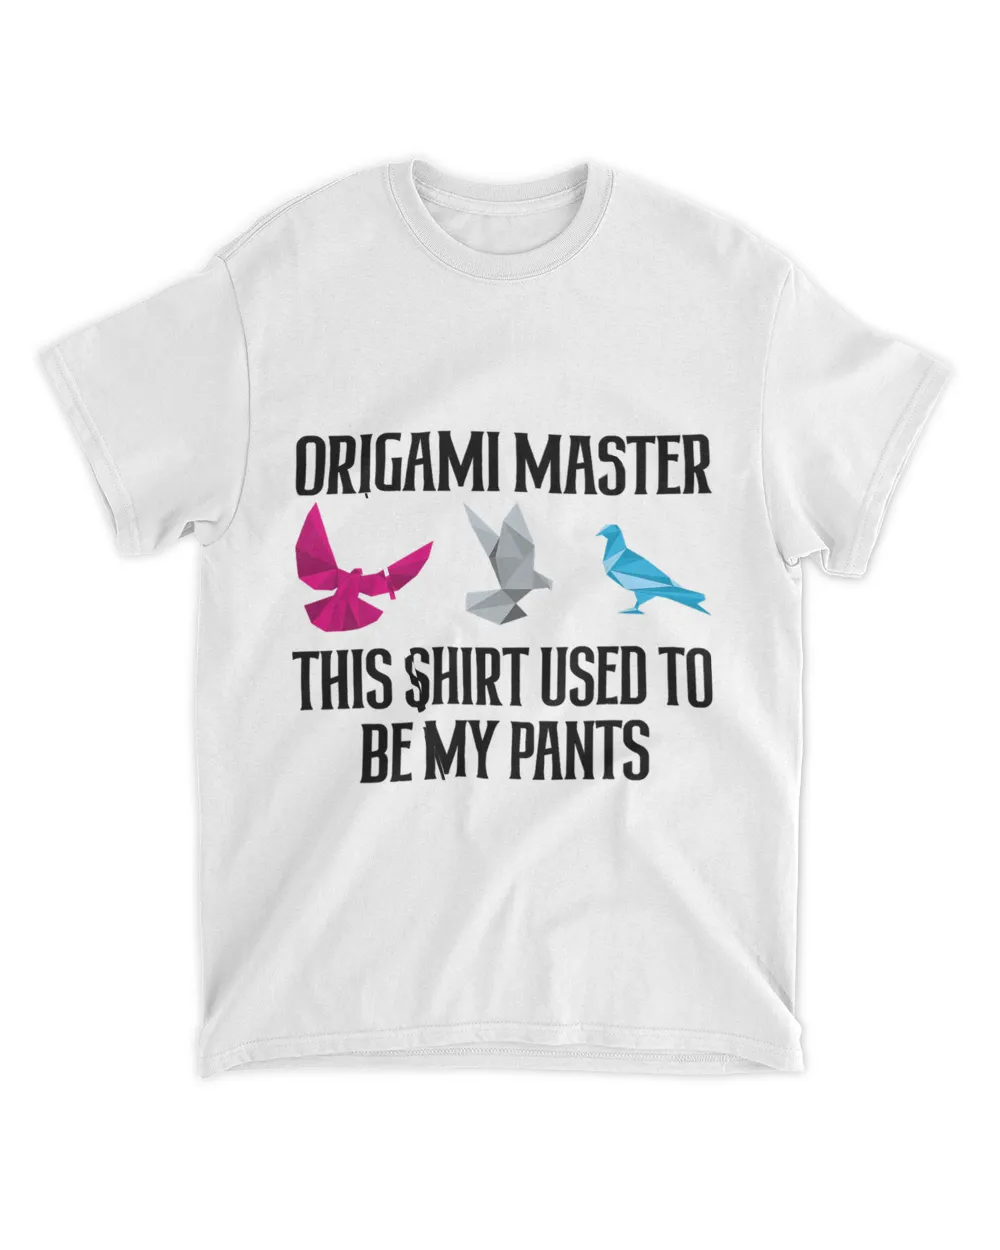 Origami Master This Shirt Used To Be My Pants 5 26